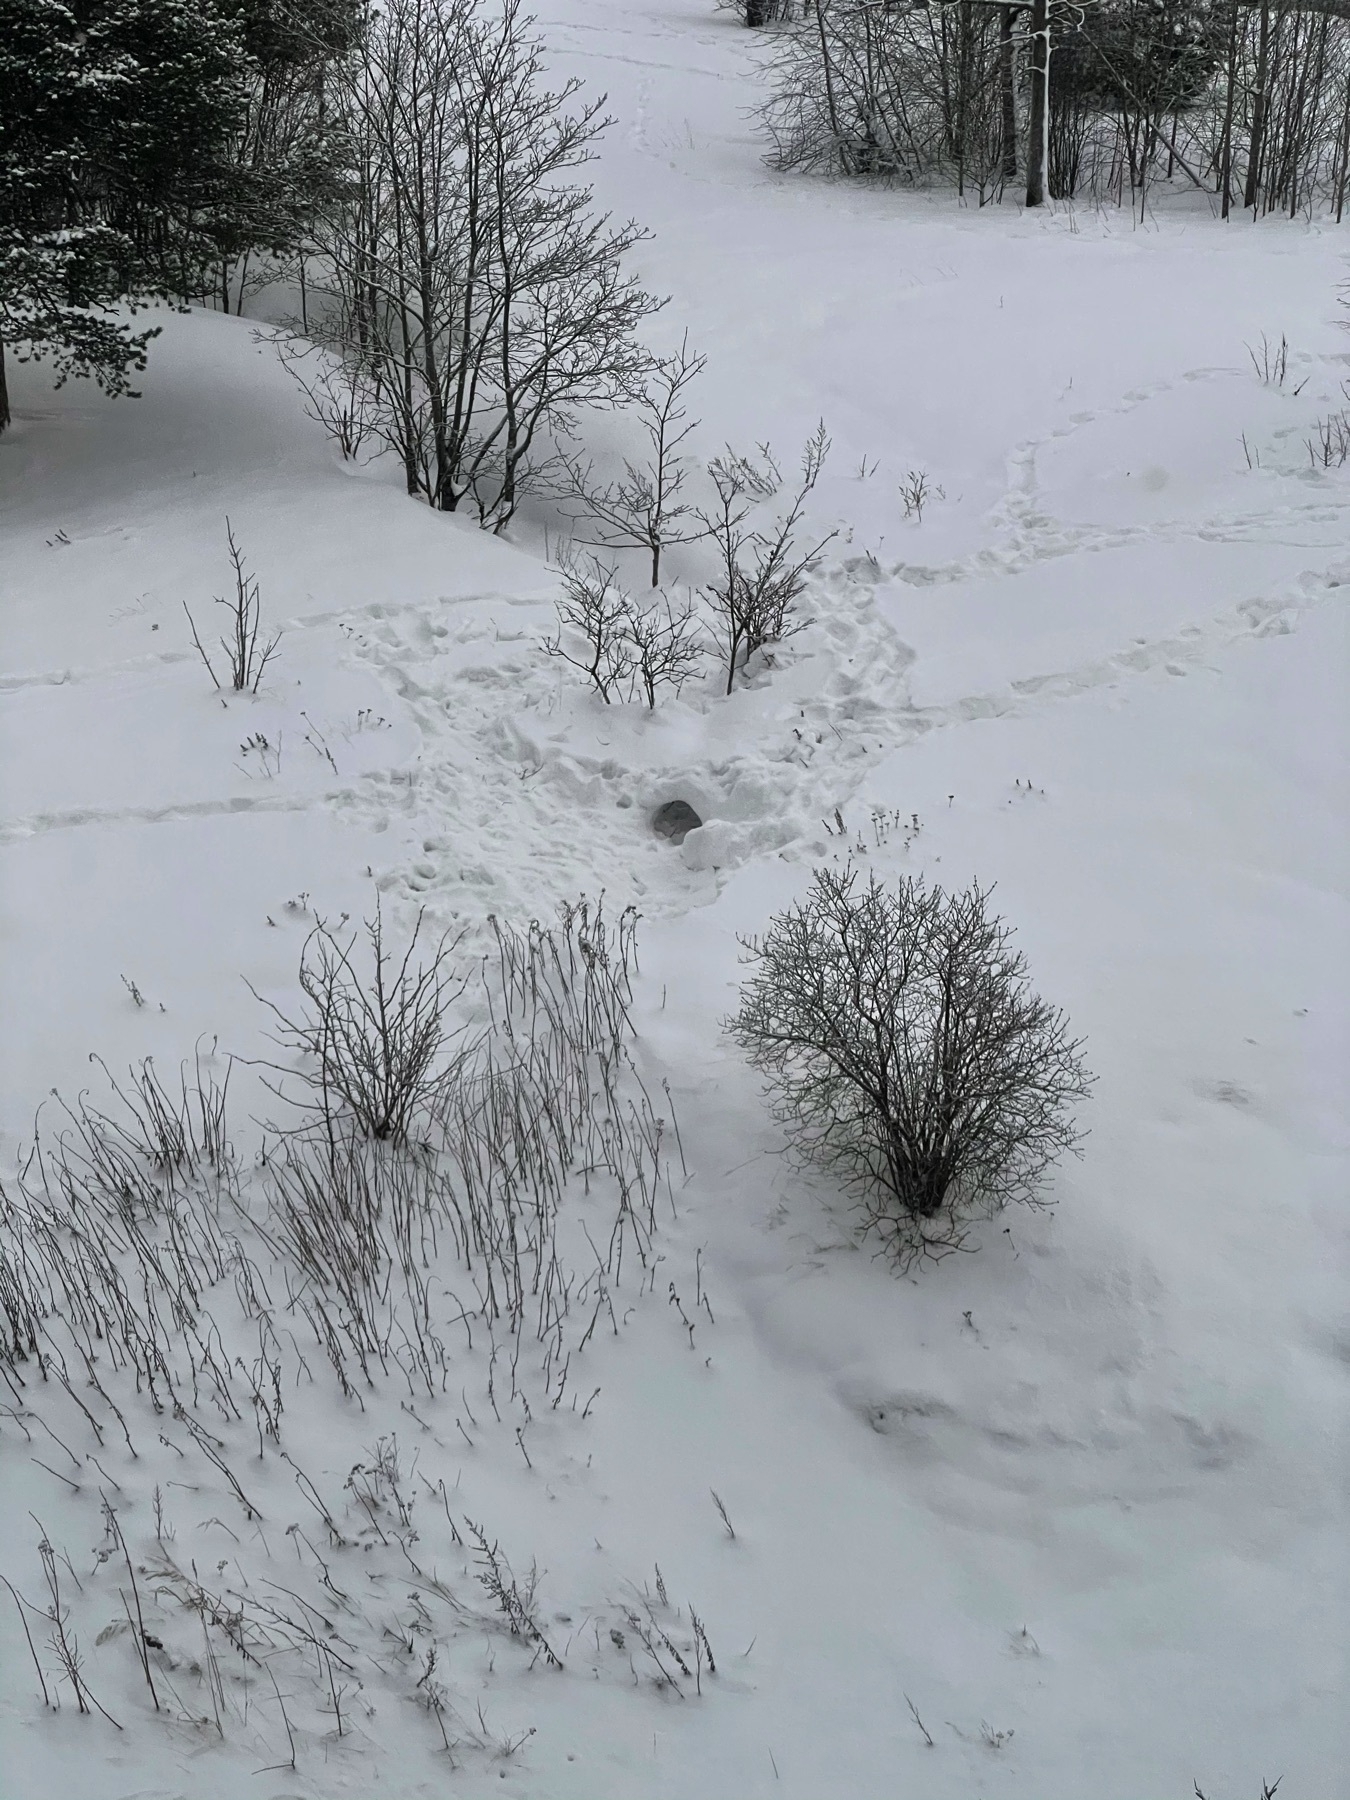 snowy hill from window, some winterseeder plants pushing through snow